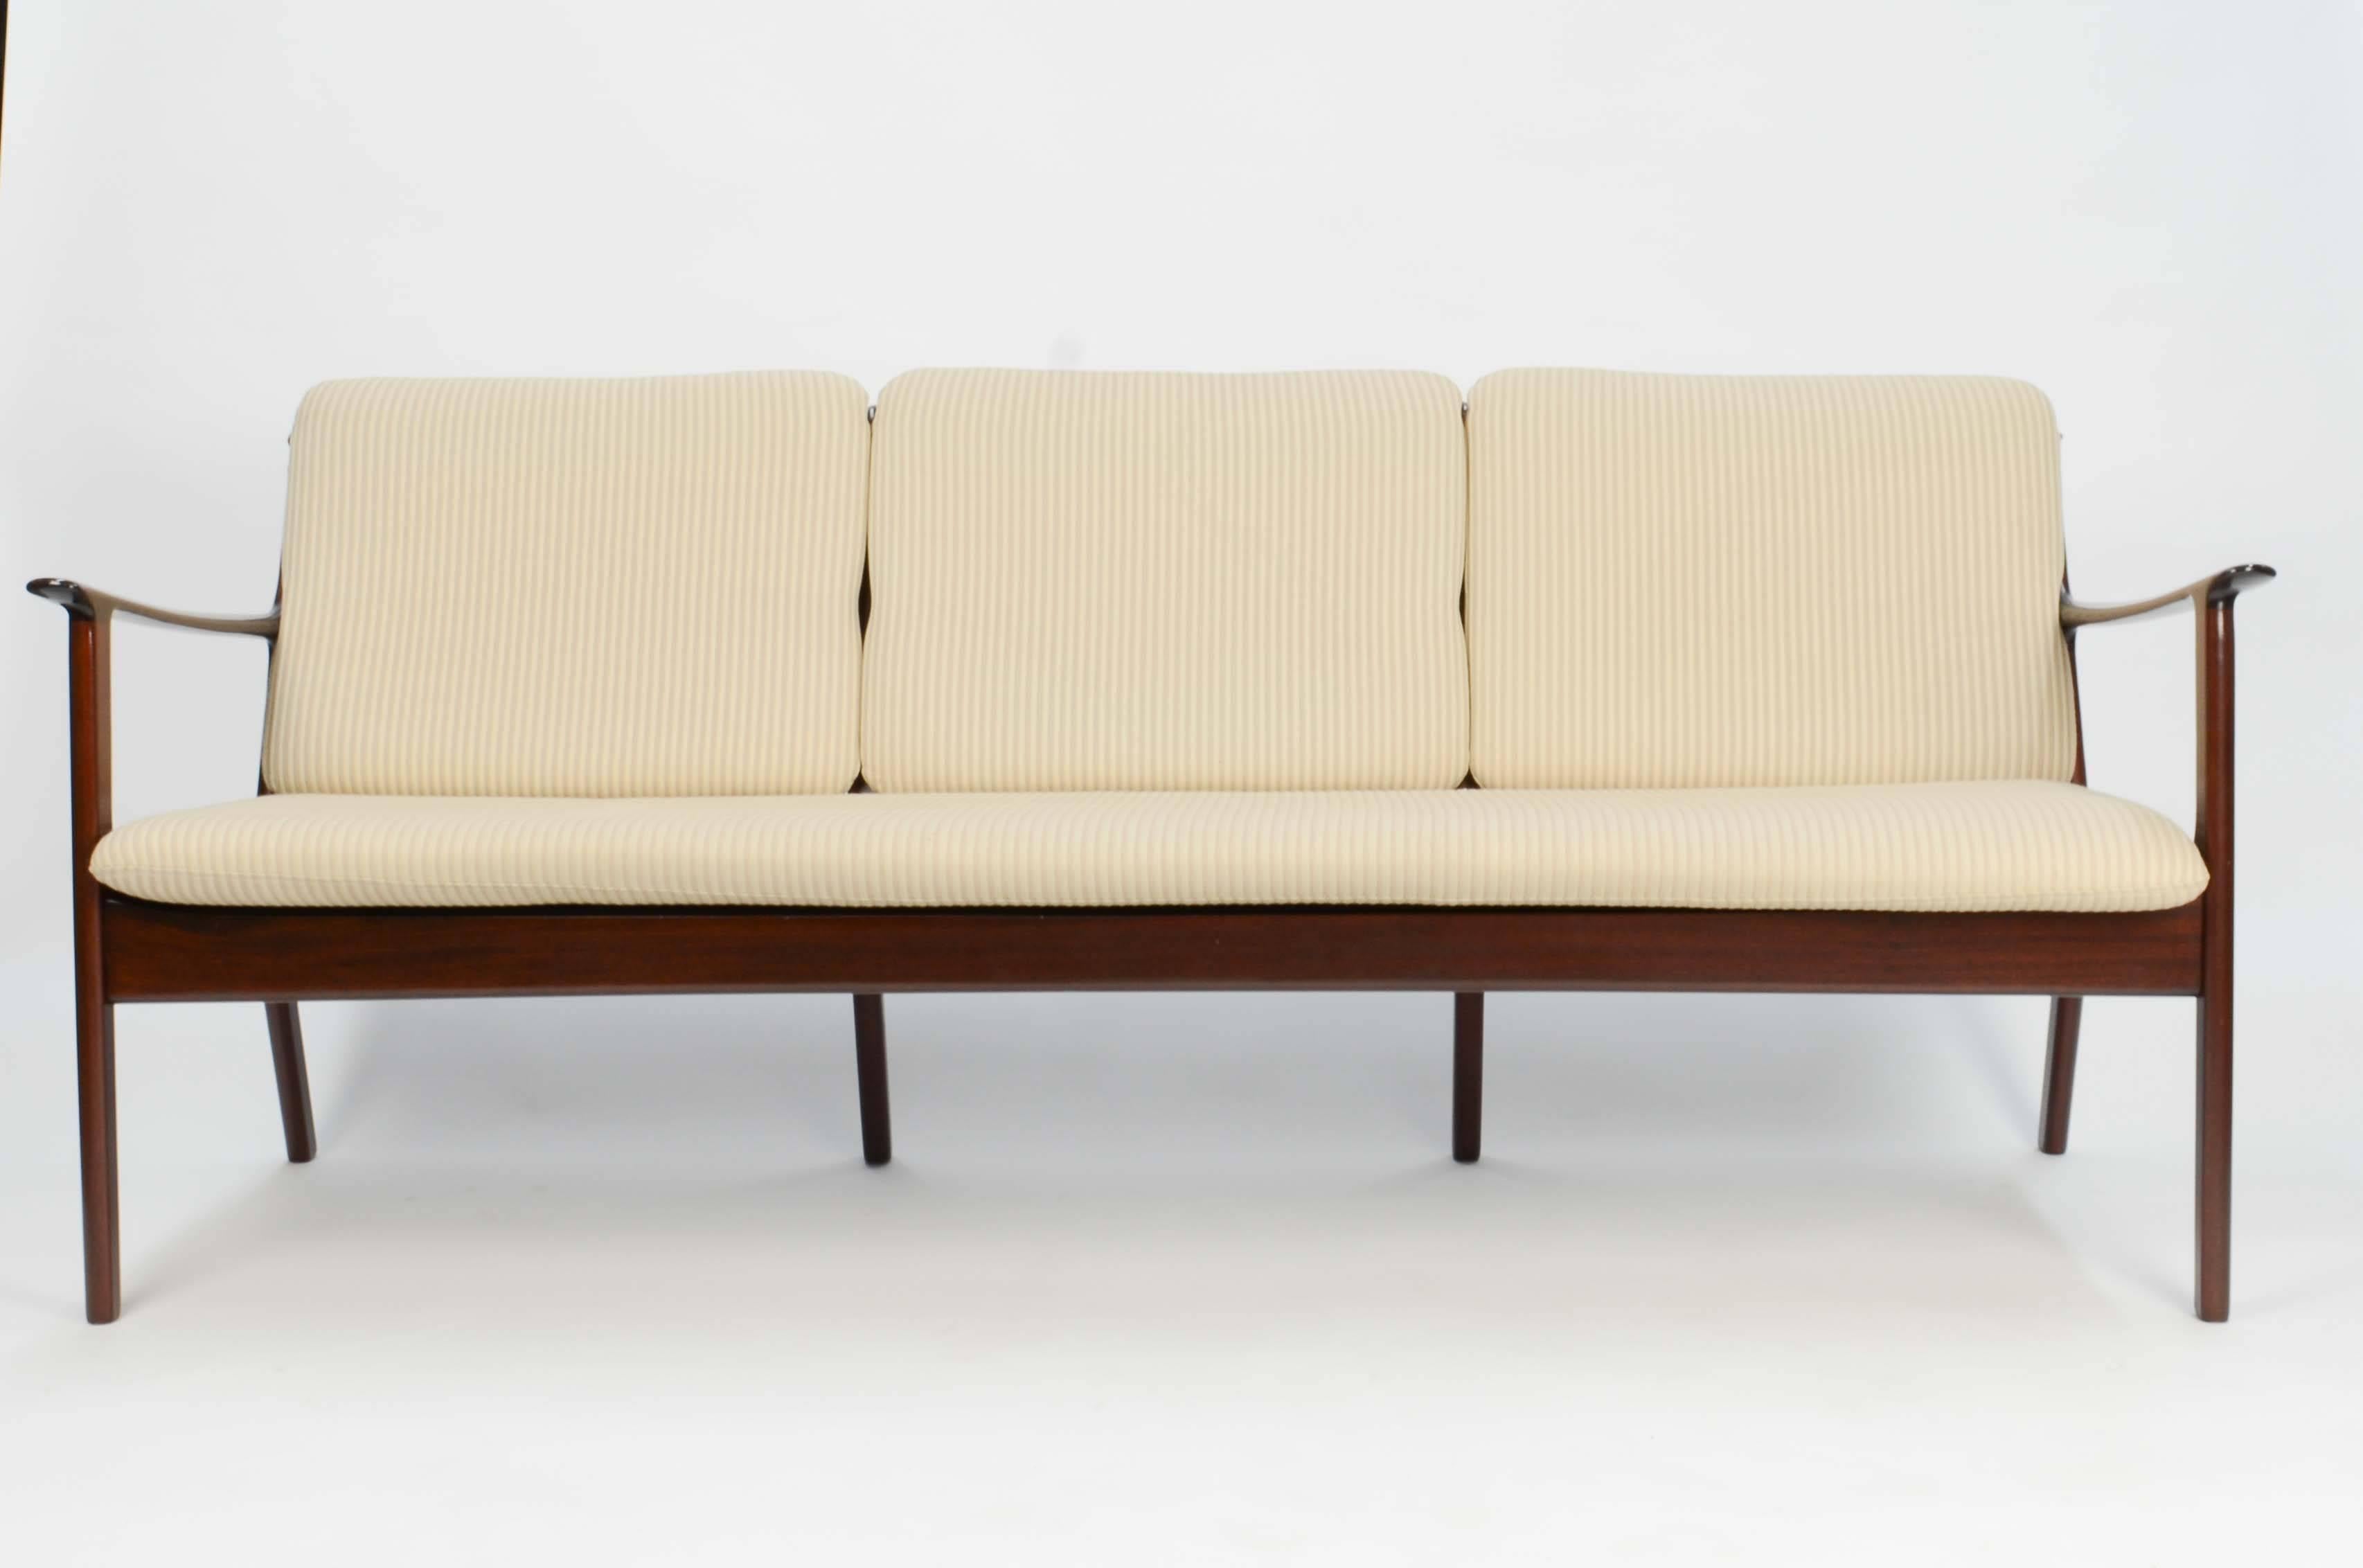 Ole Wanscher's sofa JP112 for P. Jeppesens Møbelfabrik of Denmark in Mahogany. The three-seat sofa features the detailed design of the farther of Danish modern movement.